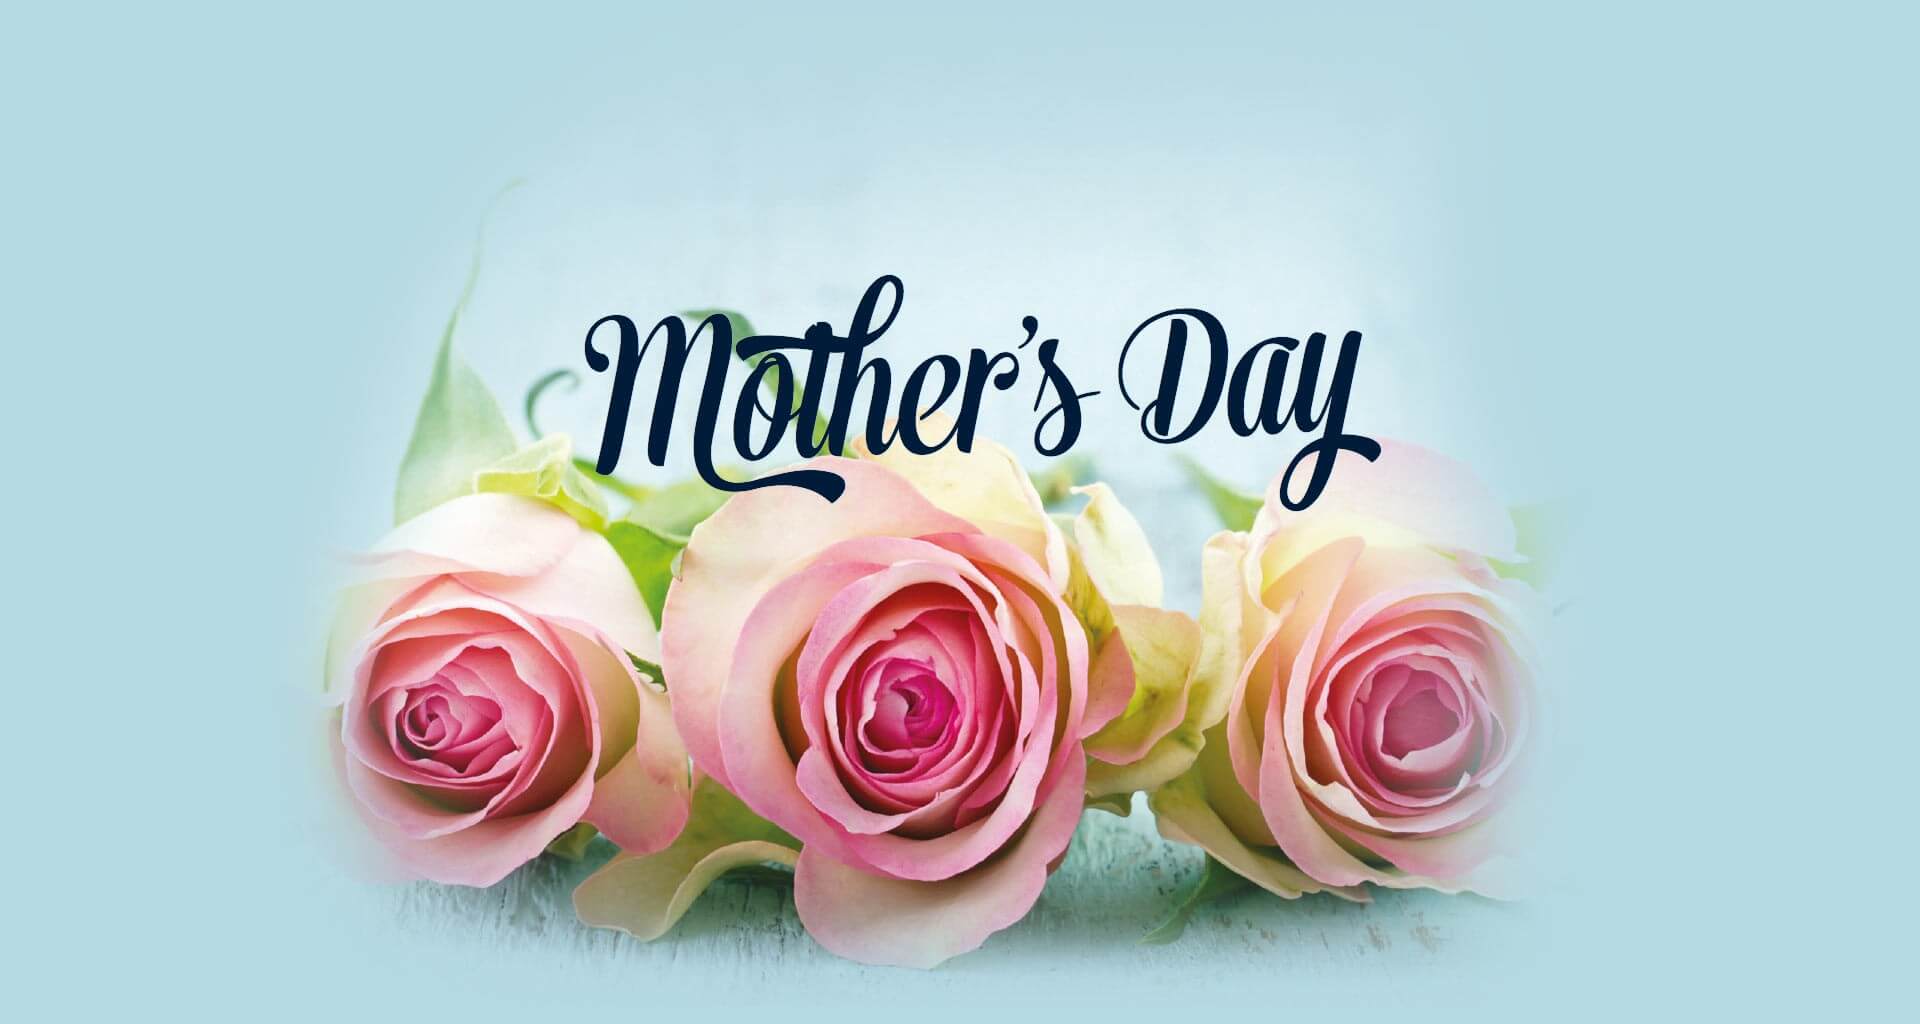 Happy Mothers Day Wishes Pink Roses Desktop HD Wallpaper